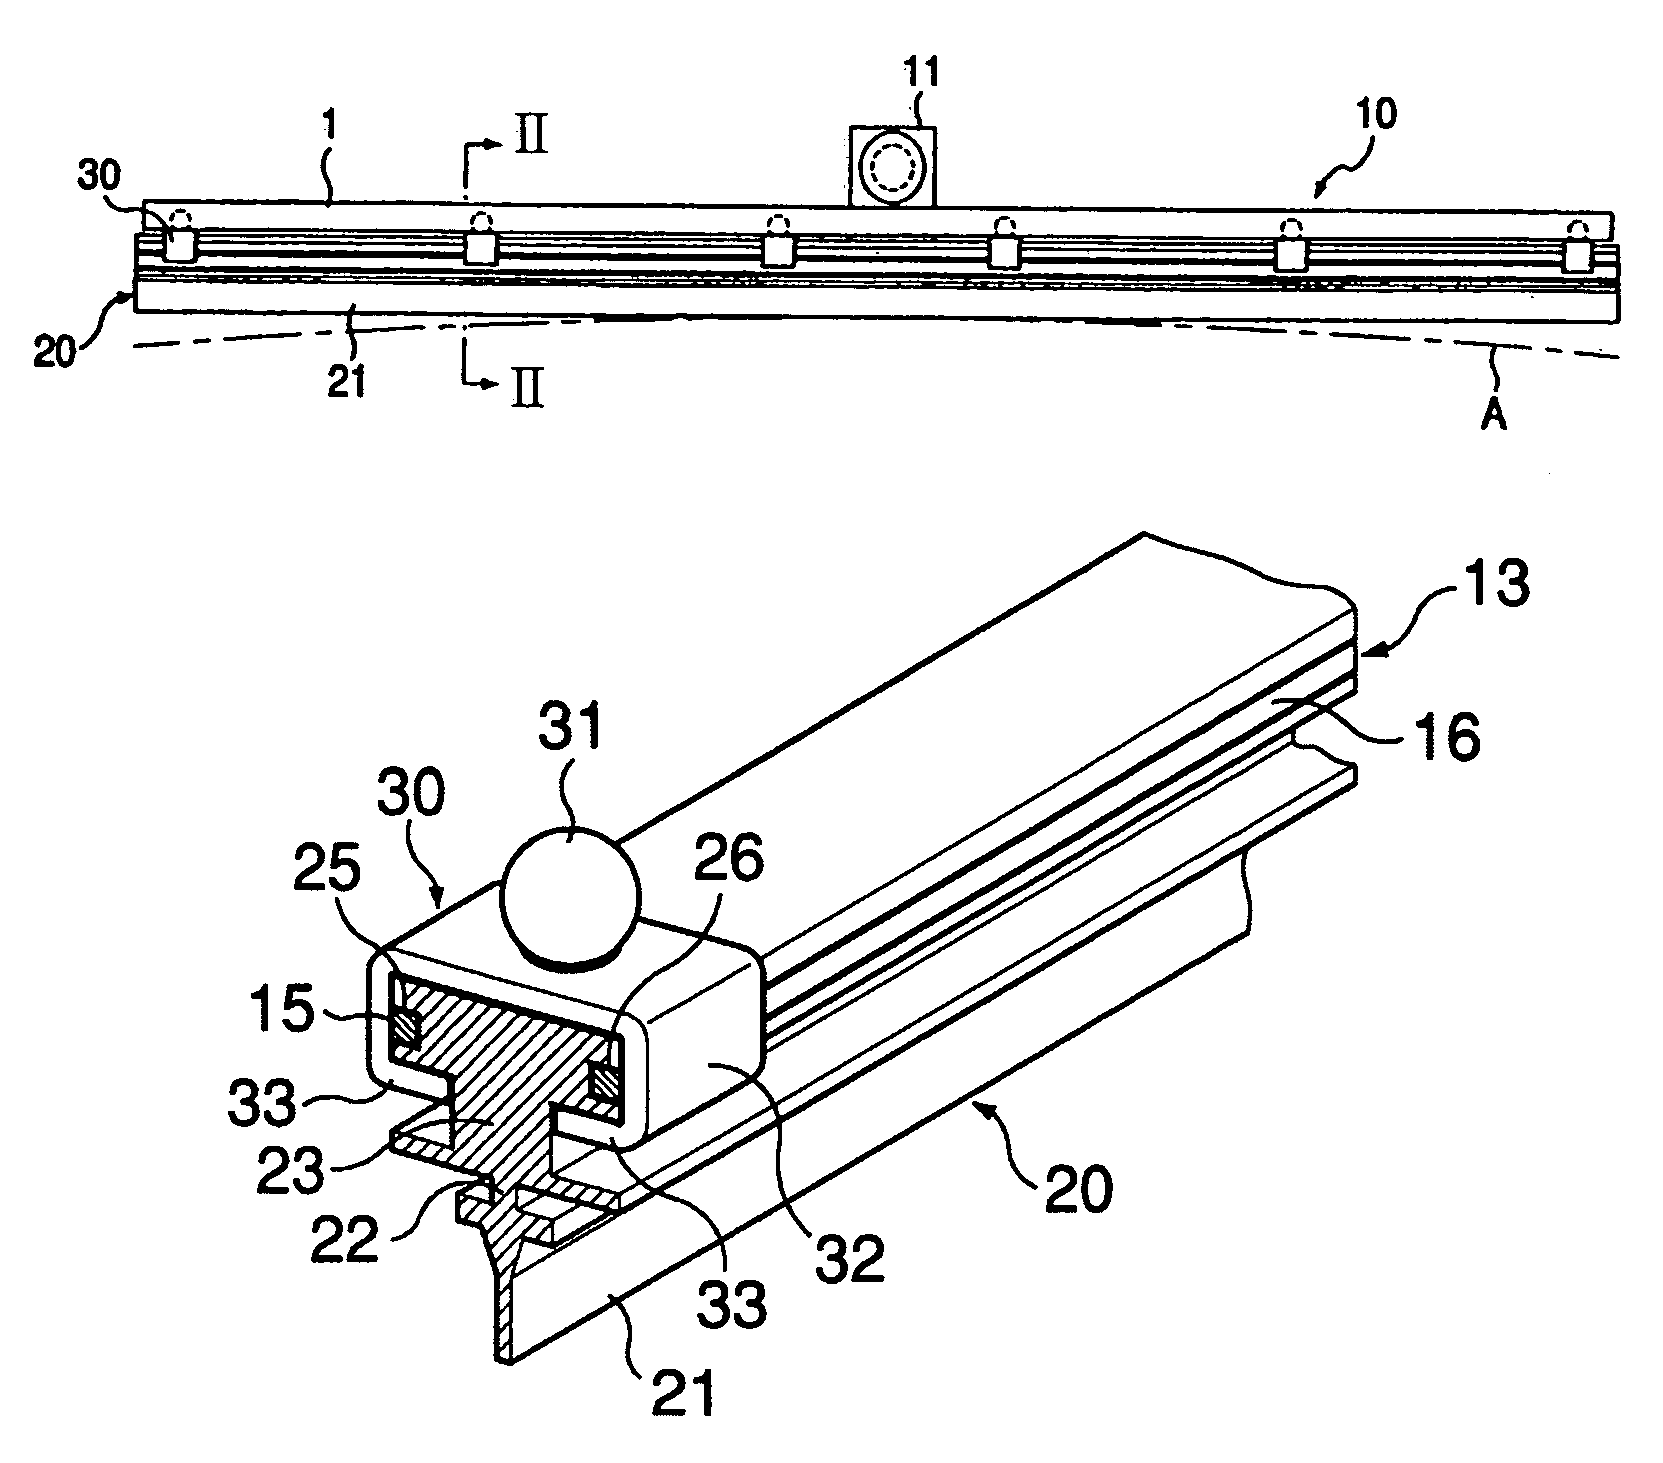 Wiper blade assembly for motor vehicle